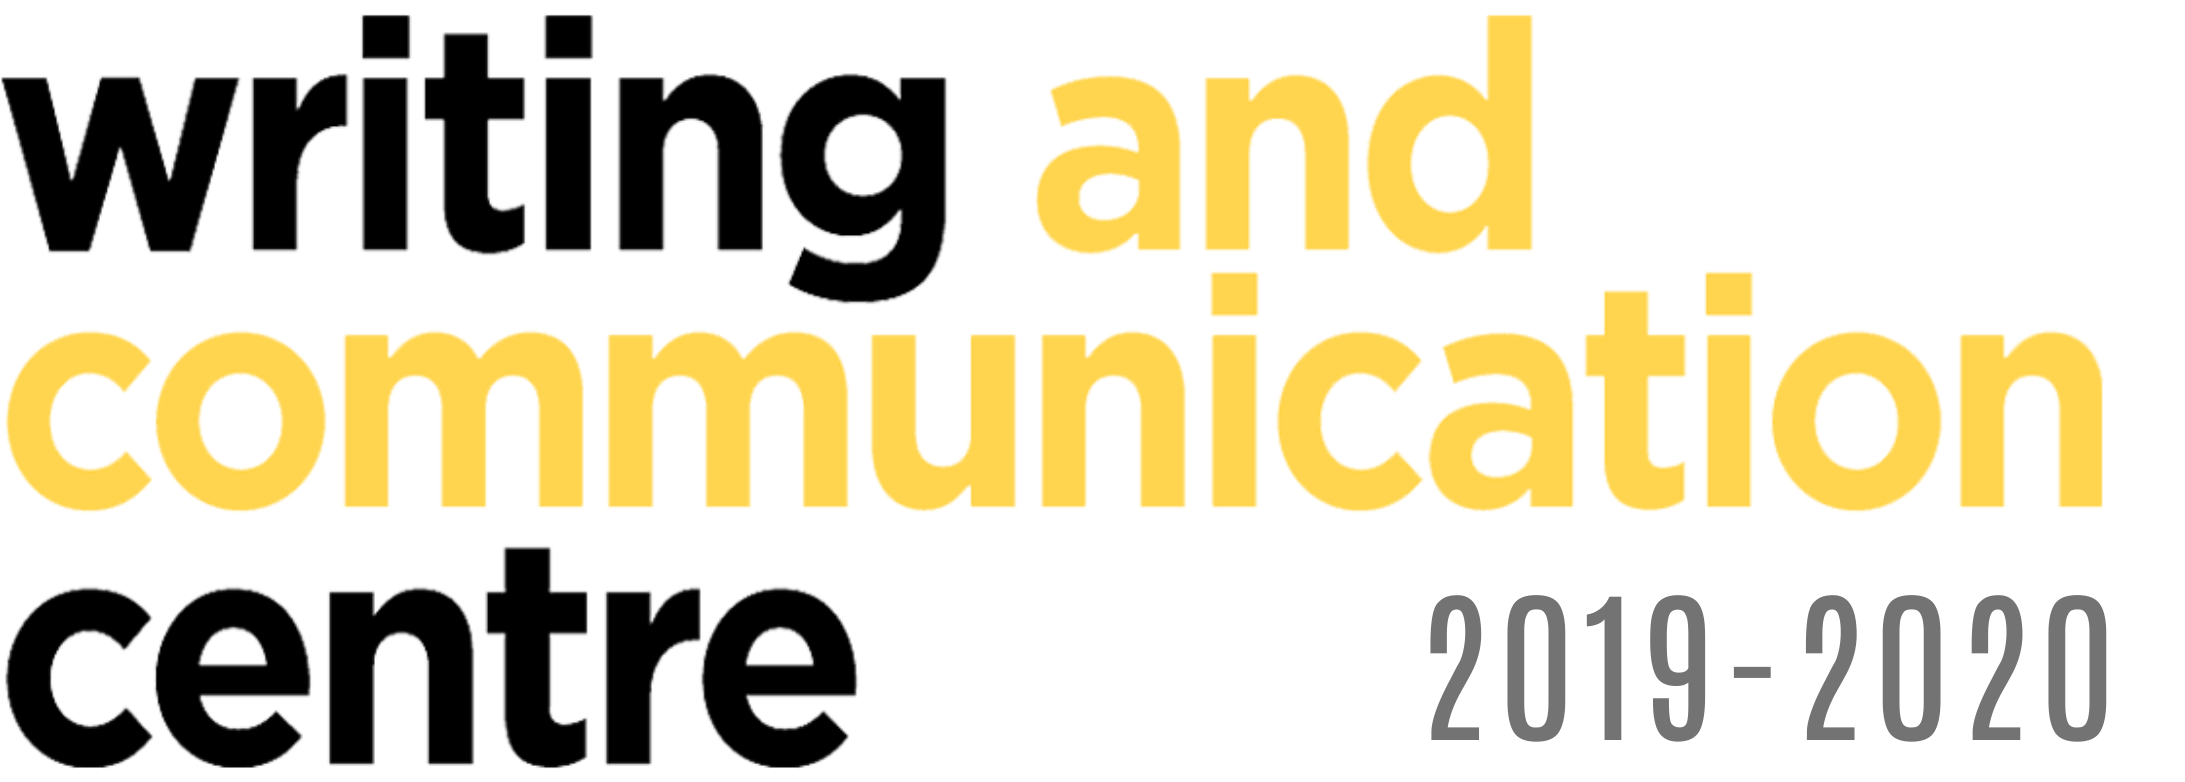 Writing and Communication Centre logo with 2019-2020 written beside it in grey